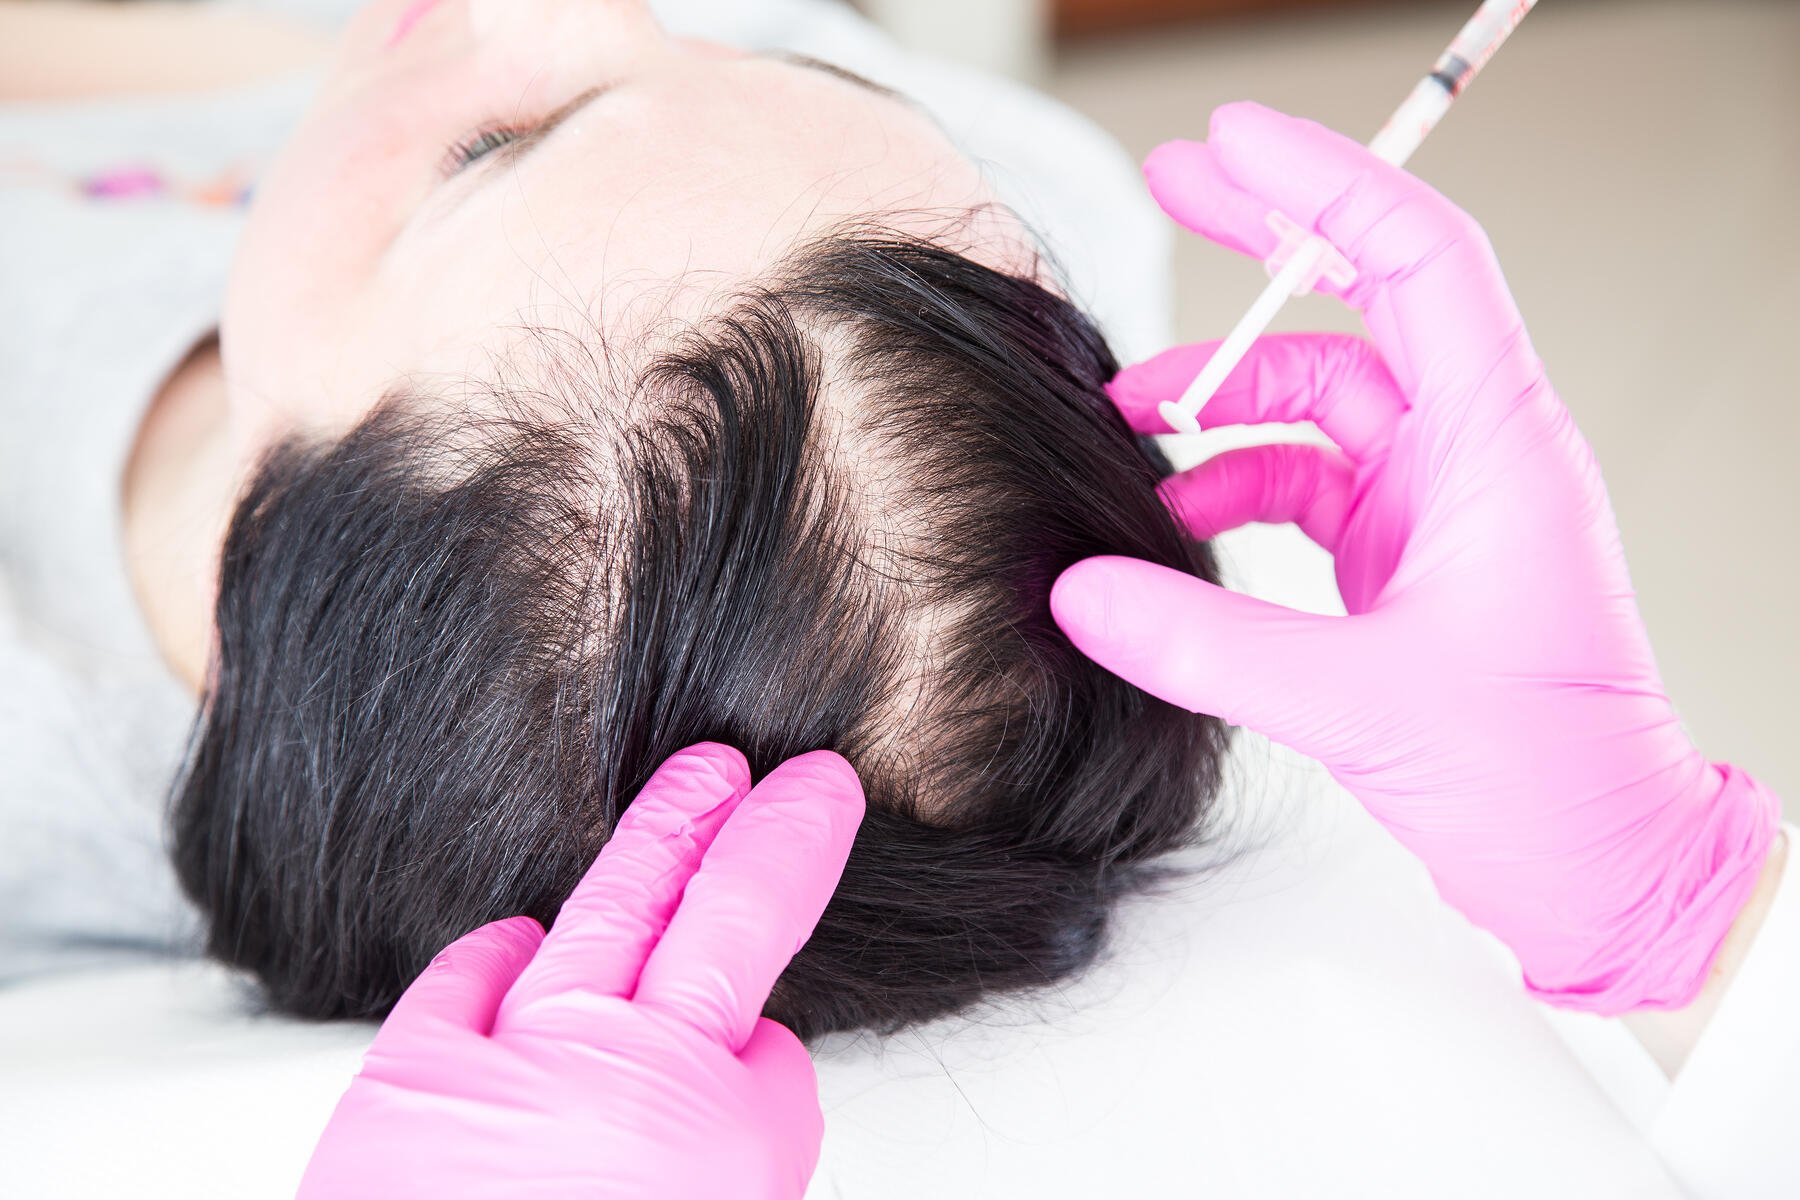 Thinning Hair: PRP Injections to the Scalp Can Help